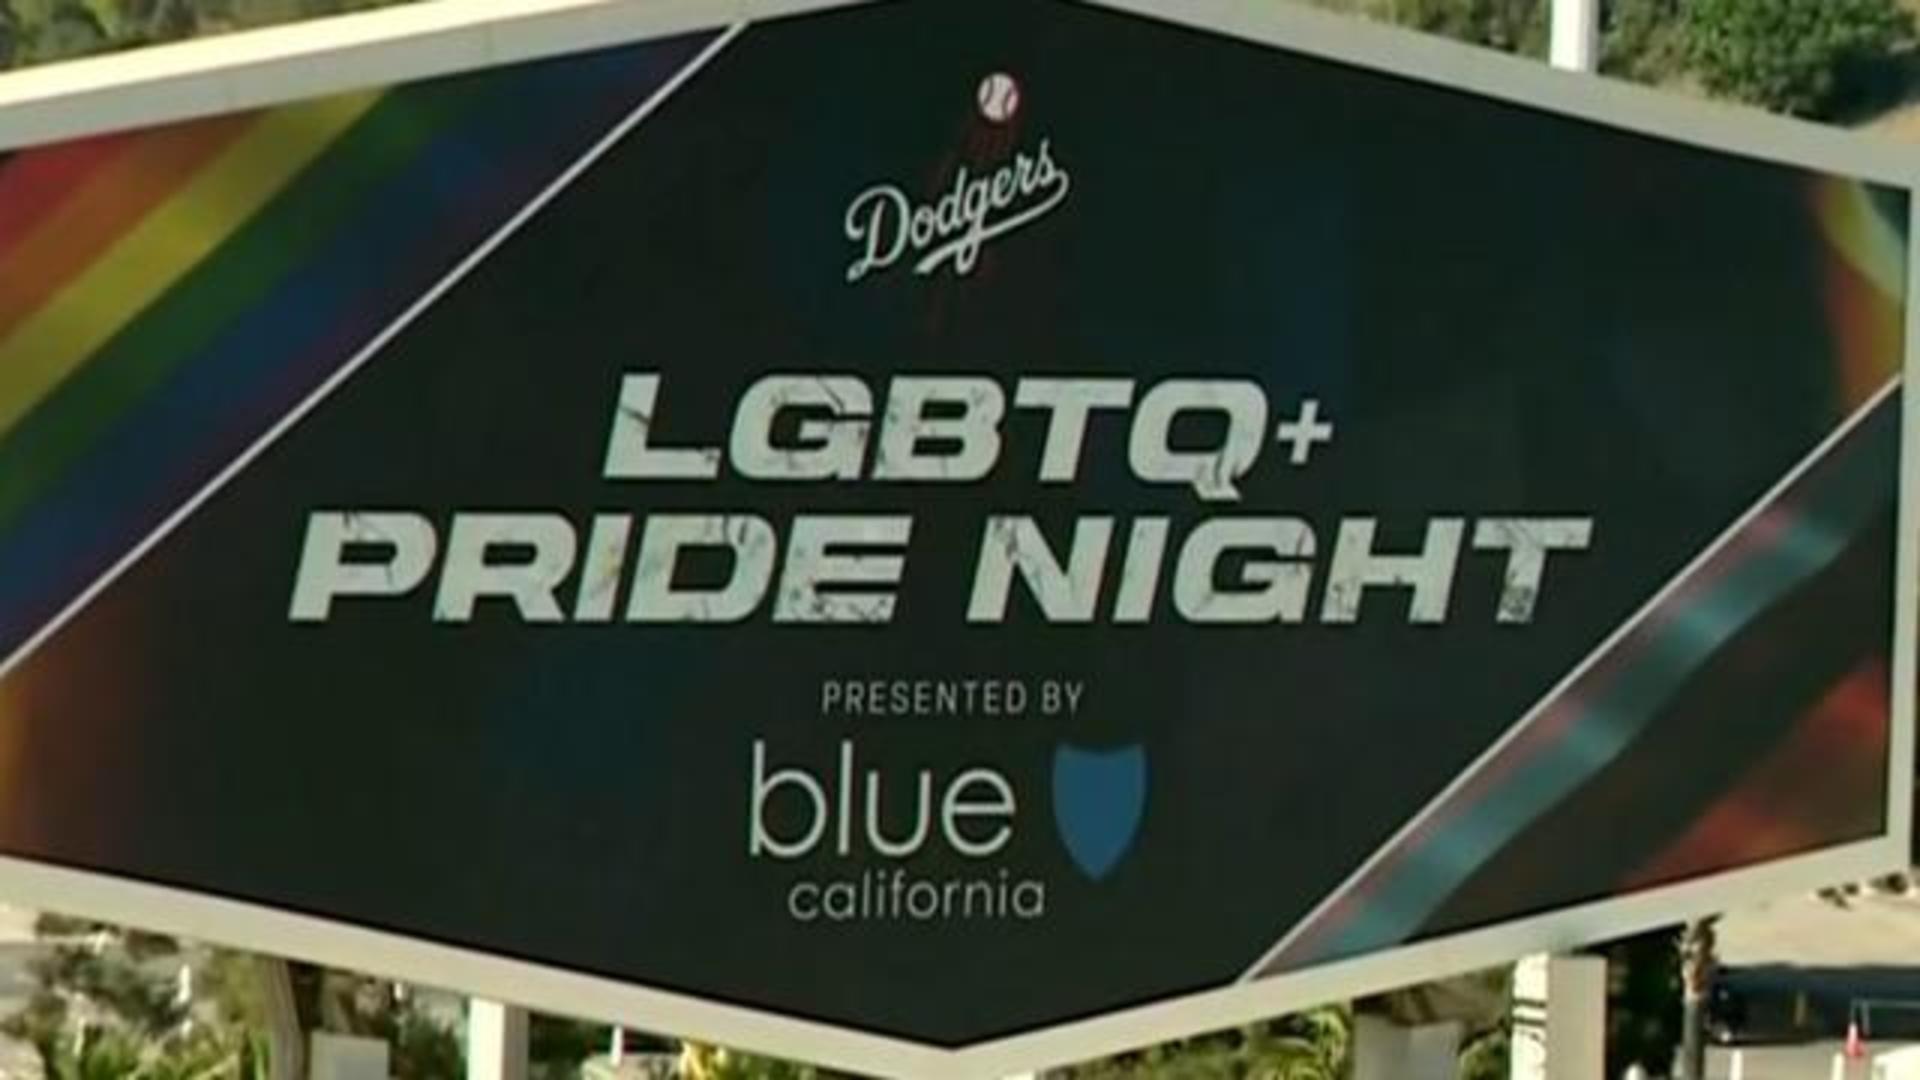 Dodgers honor drag group on Pride Night amid protests - CBS News